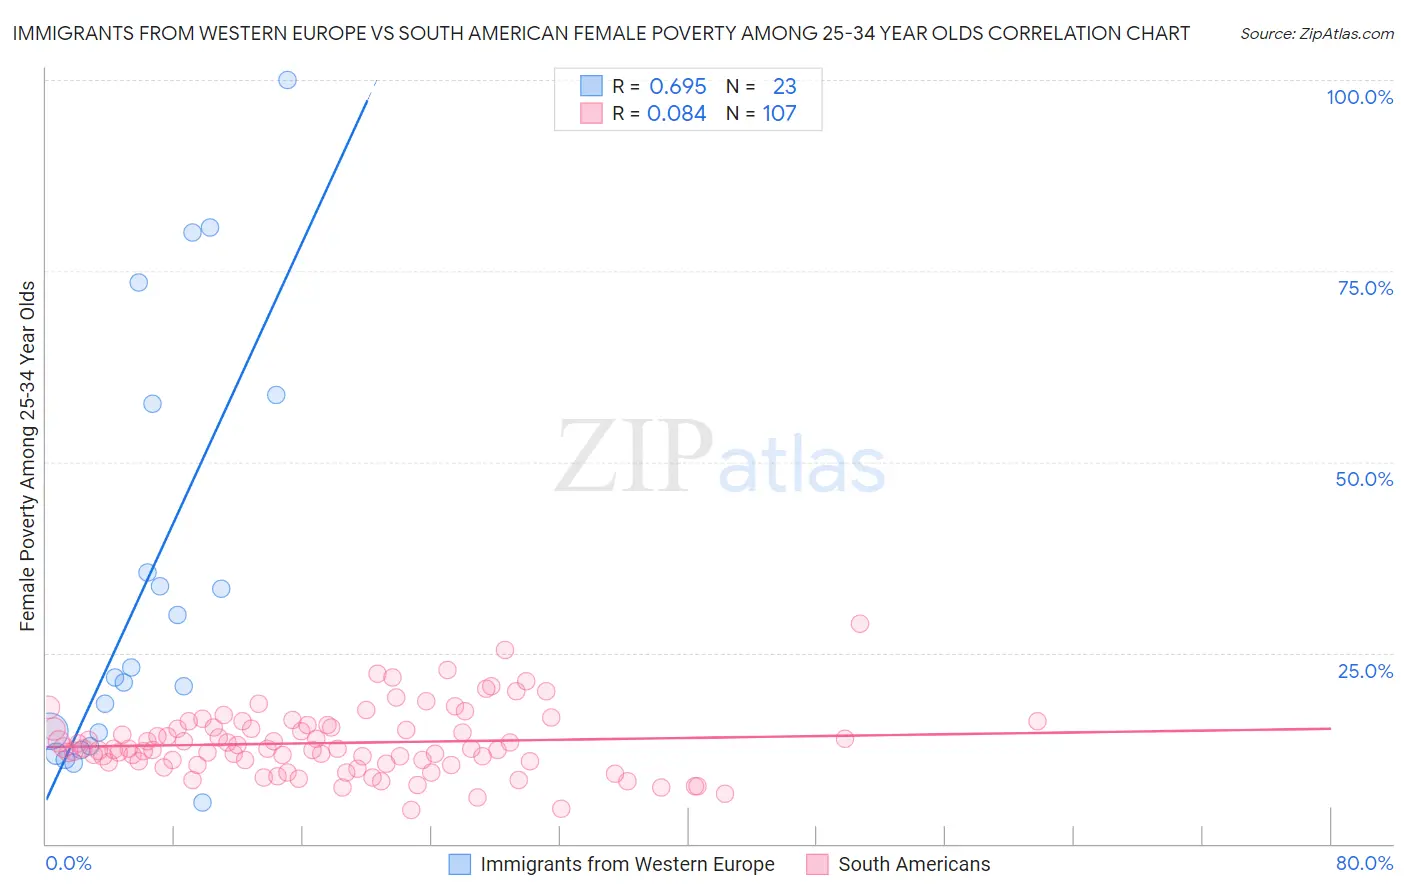 Immigrants from Western Europe vs South American Female Poverty Among 25-34 Year Olds